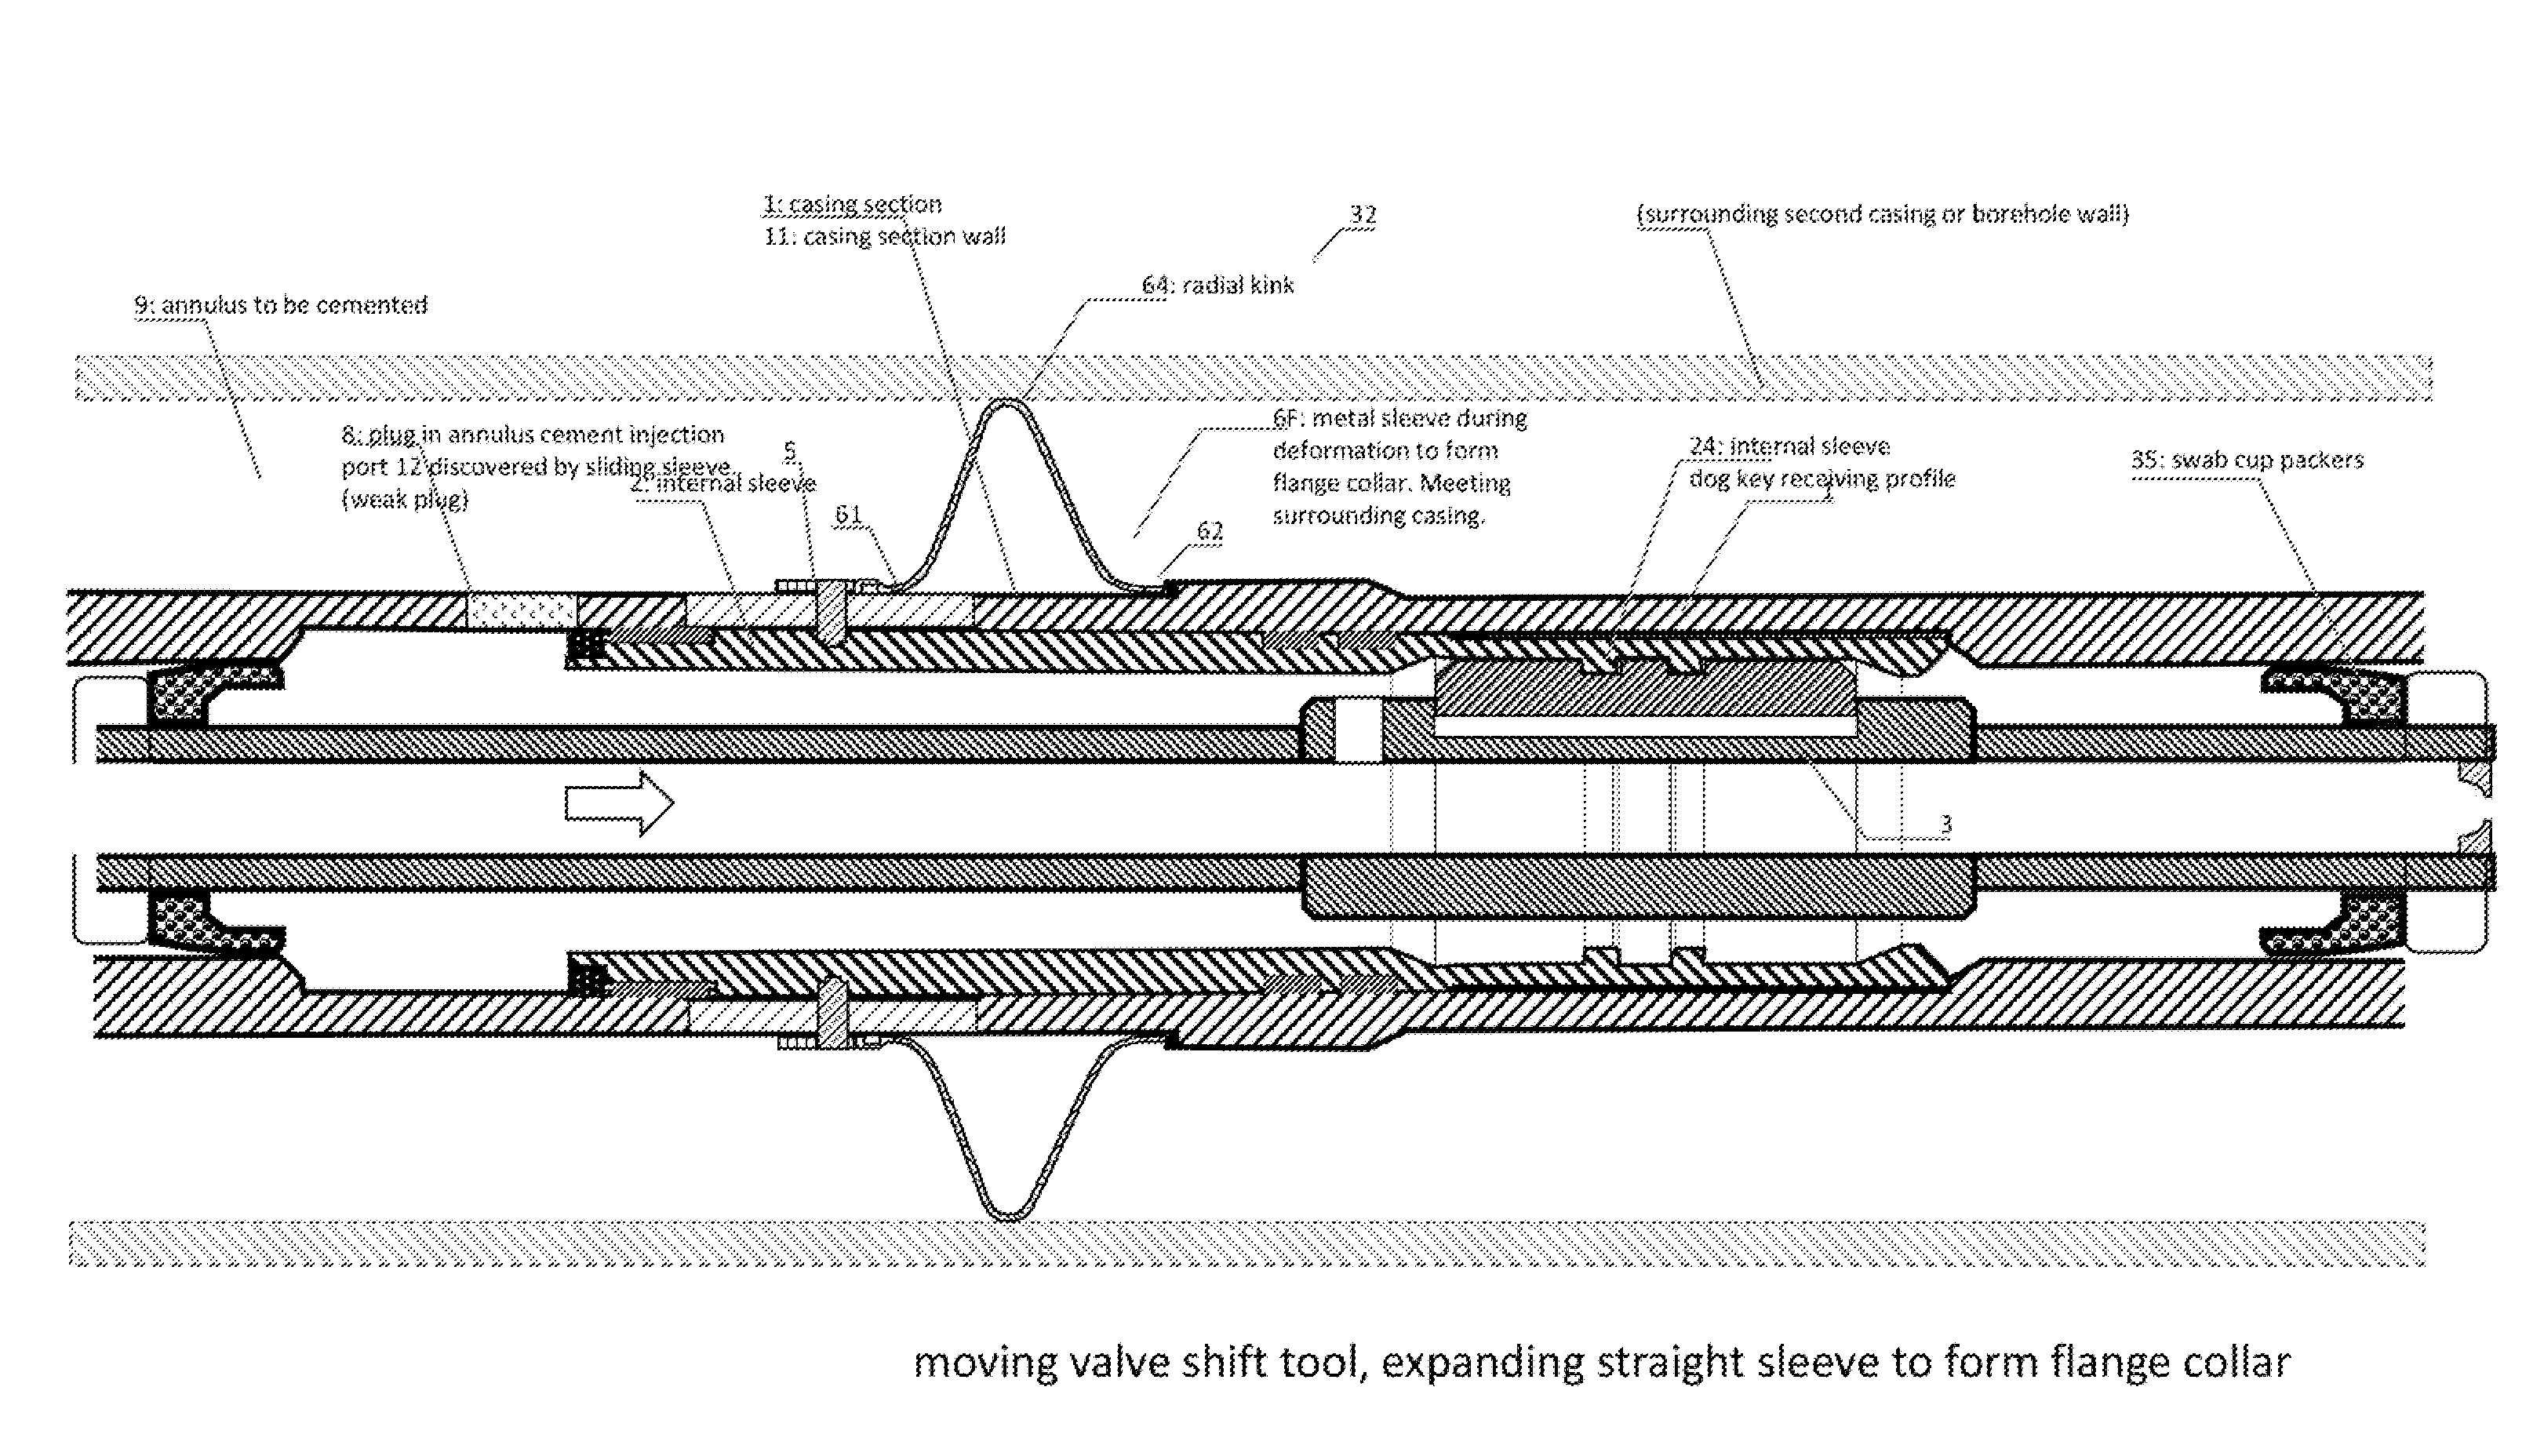 Casing annulus cement foundation system and a method for forming a flange collar constituting a cement foundation